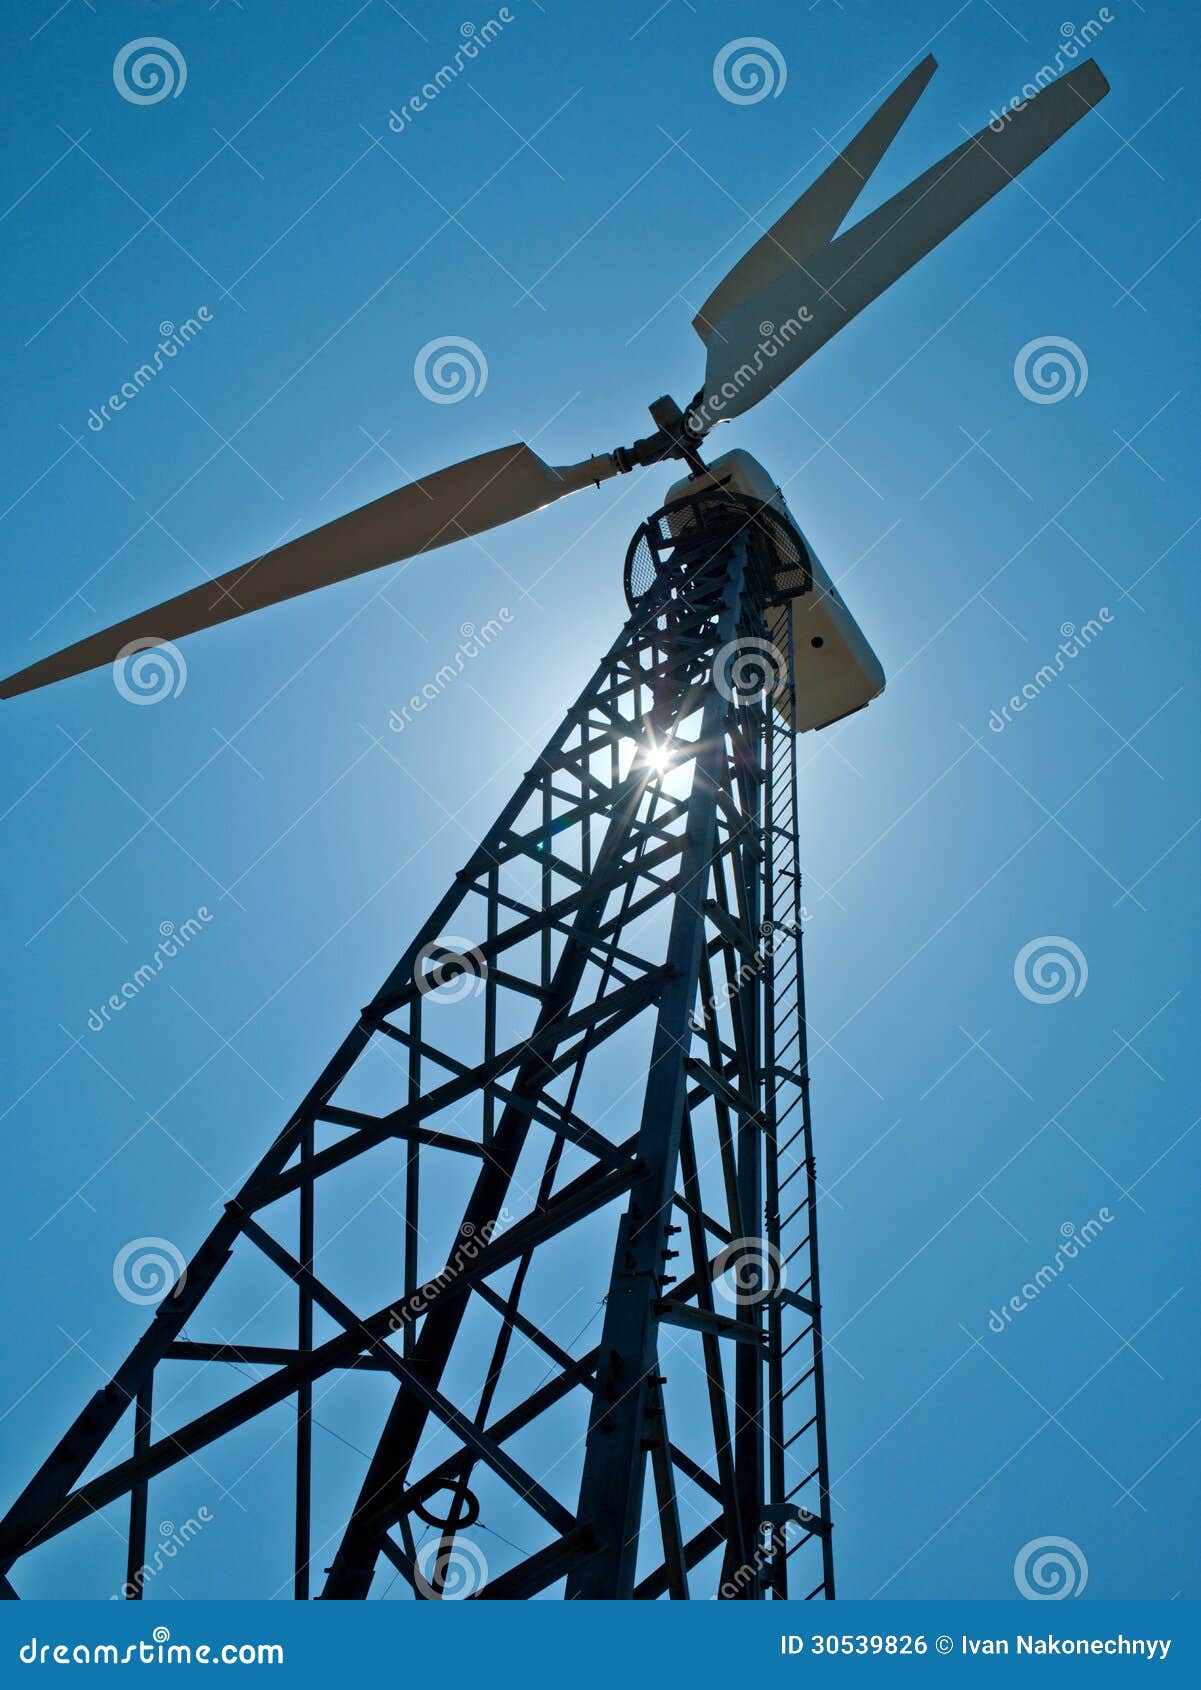 Photo in the nature of a large wind turbine generates electricity.